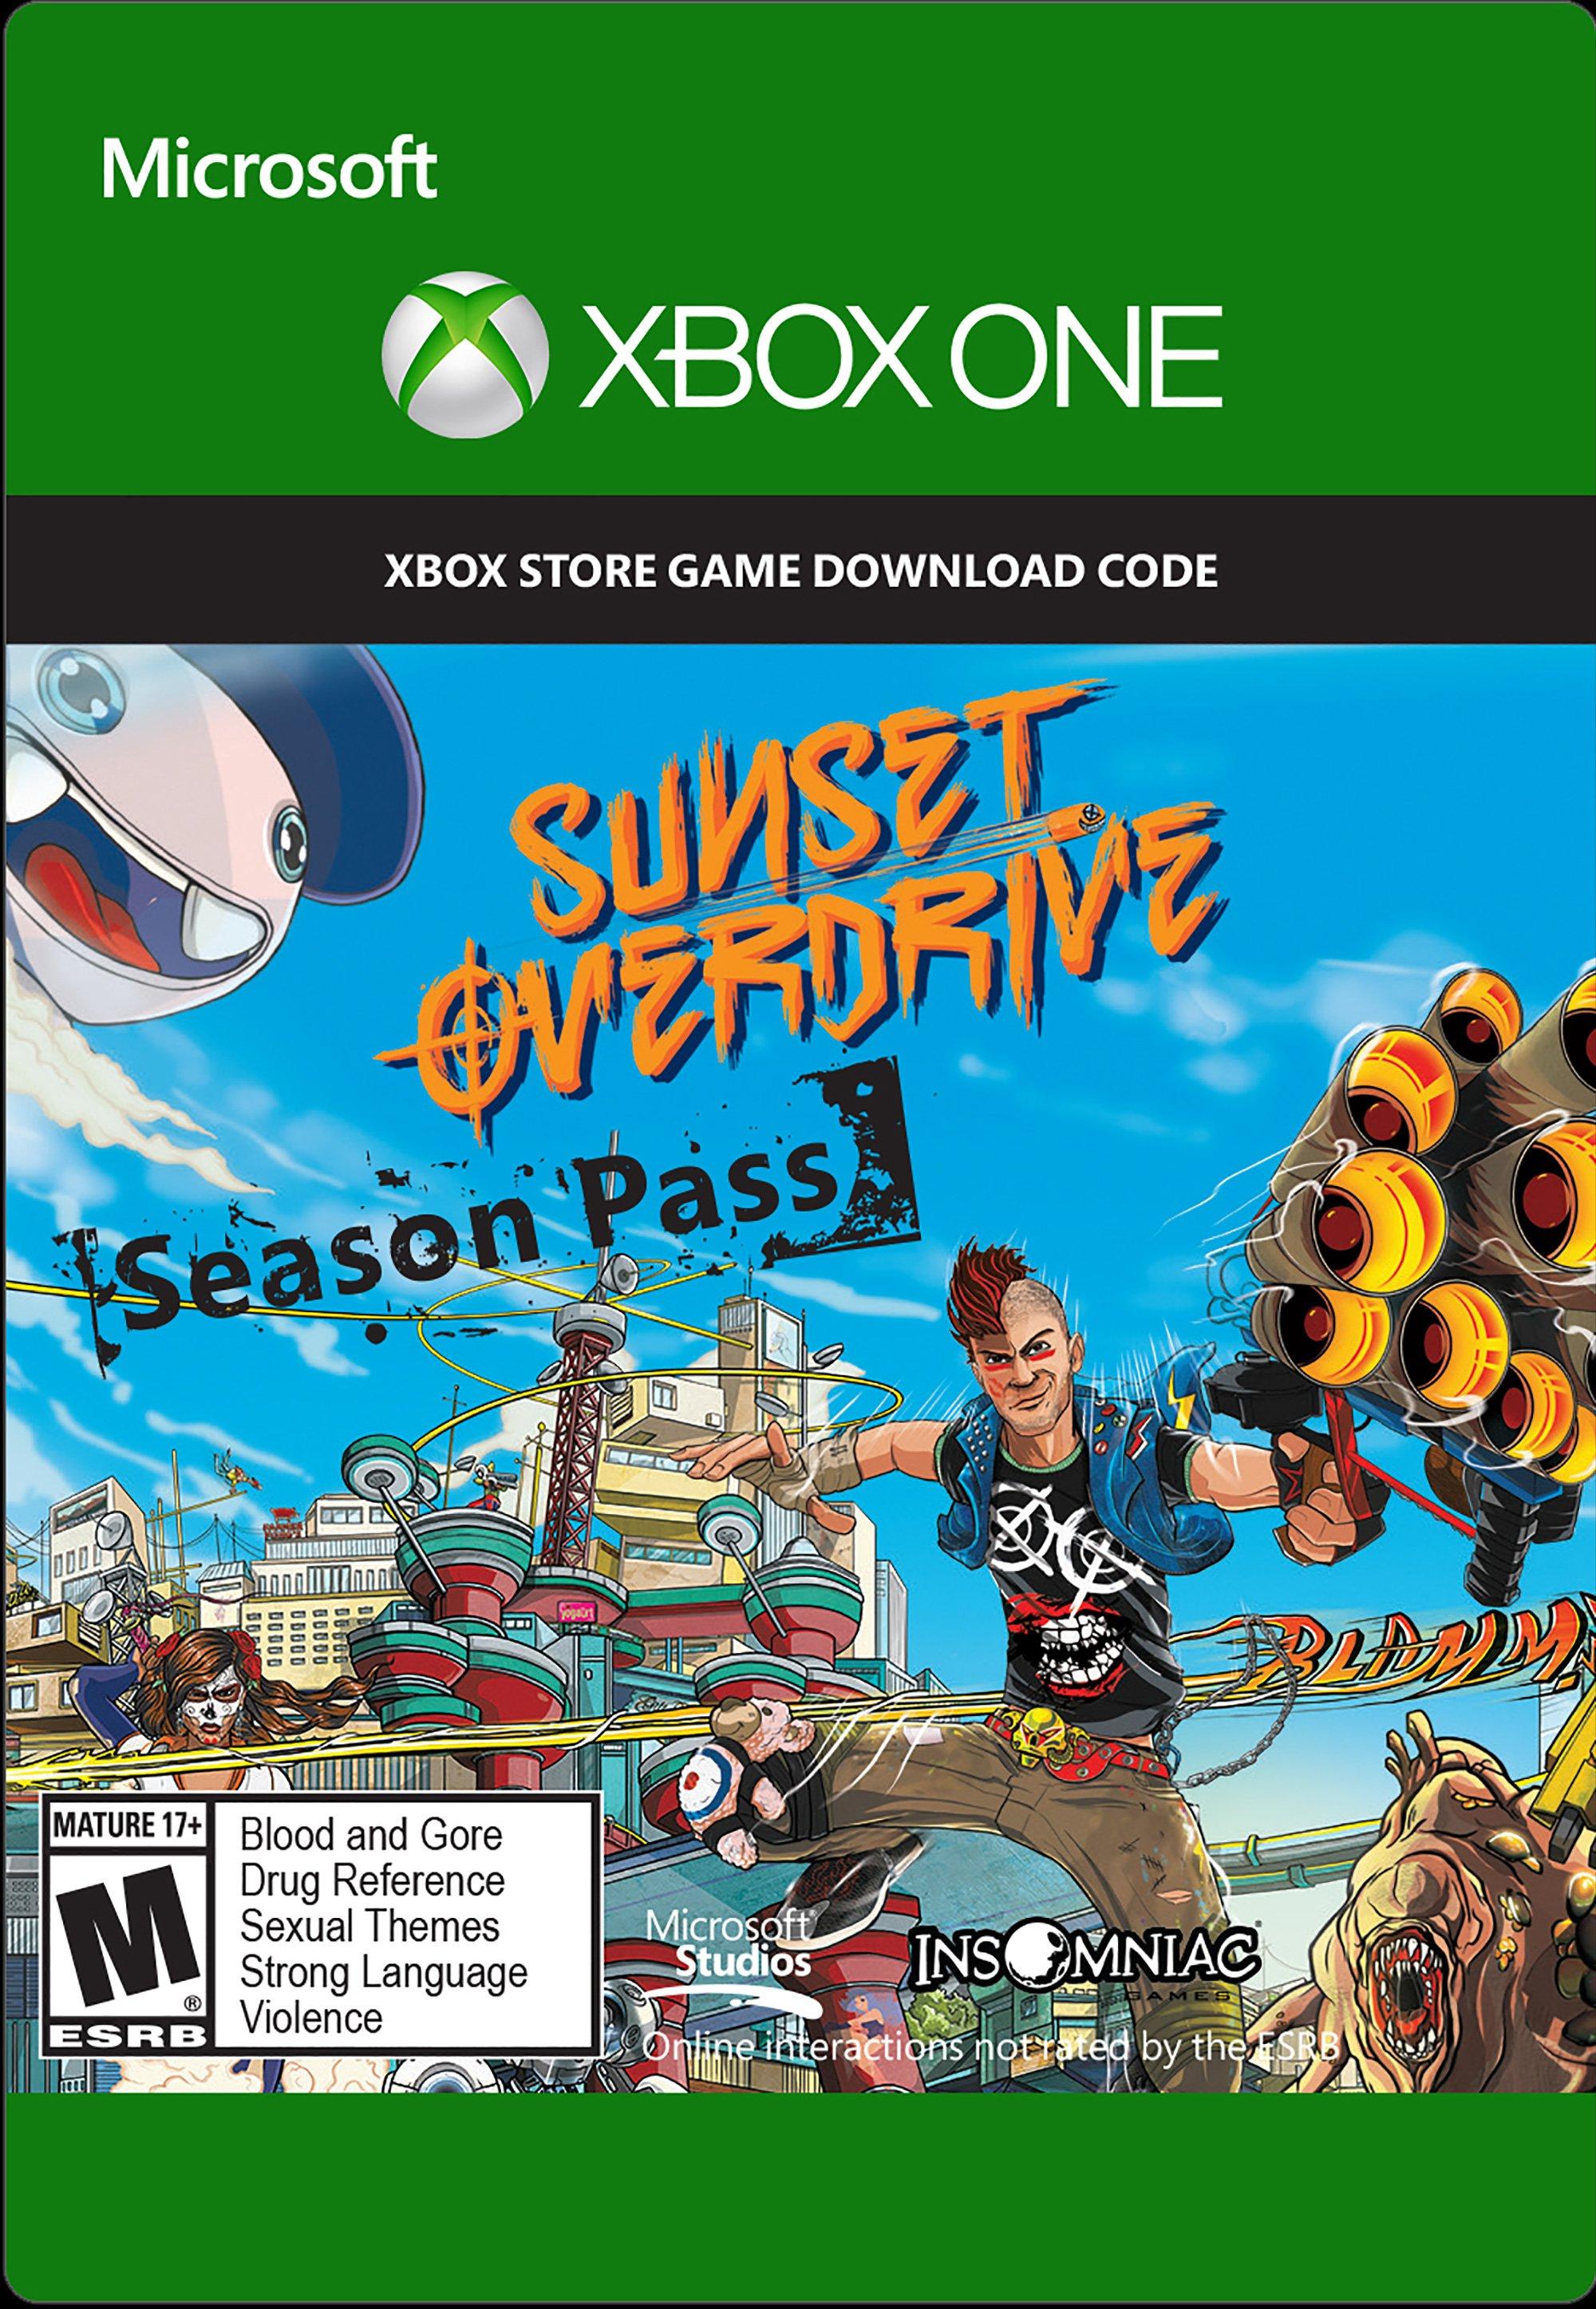 Sunset Overdrive Review Xbox Series X Gameplay [Xbox Game Pass] 